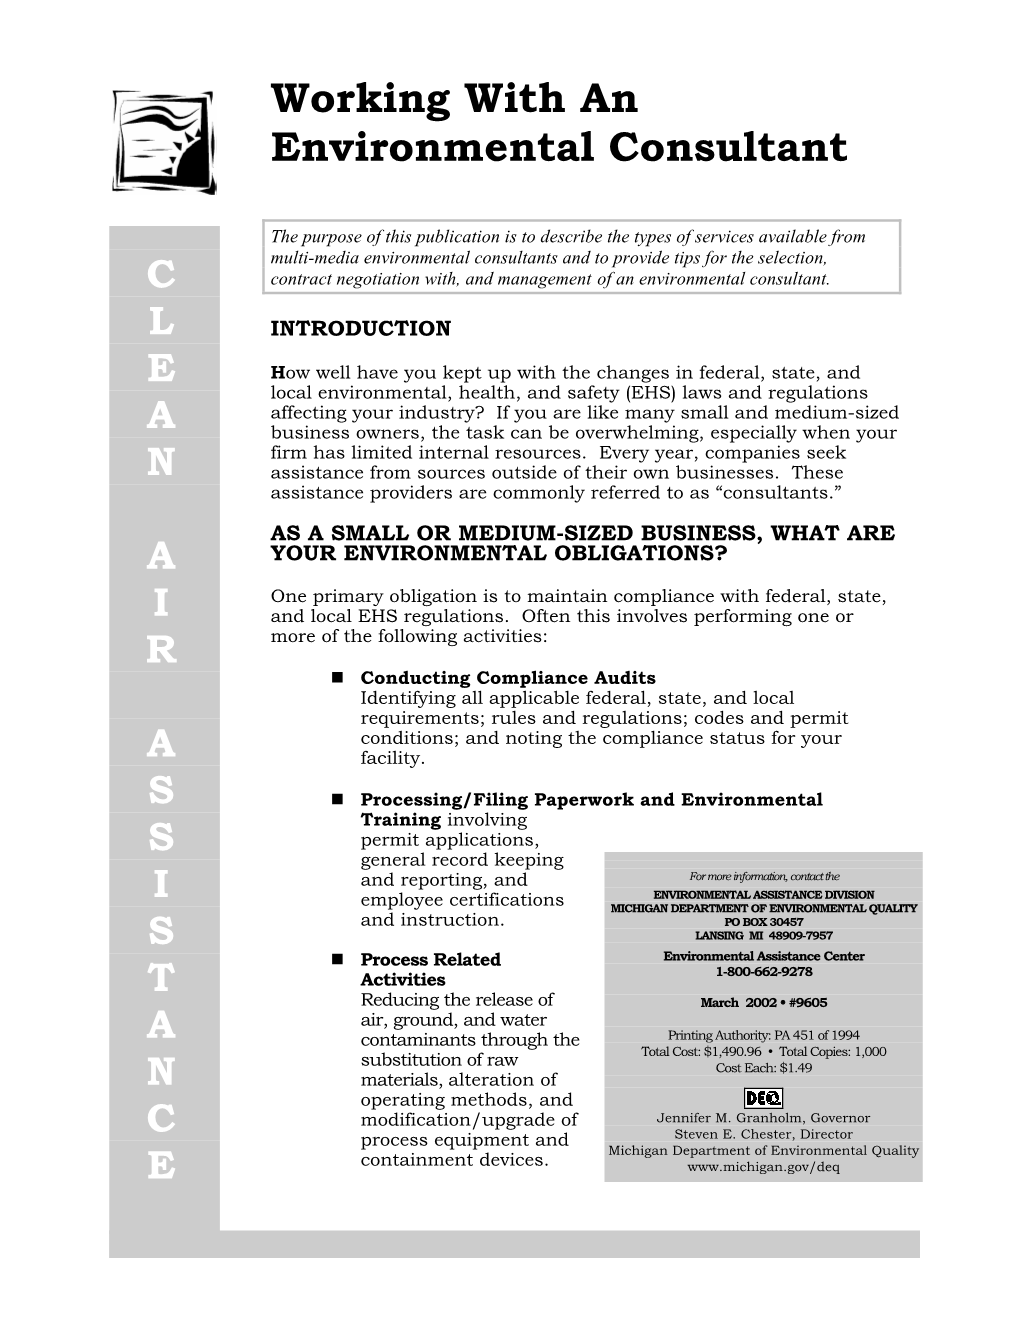 Working with an Environmental Consultant